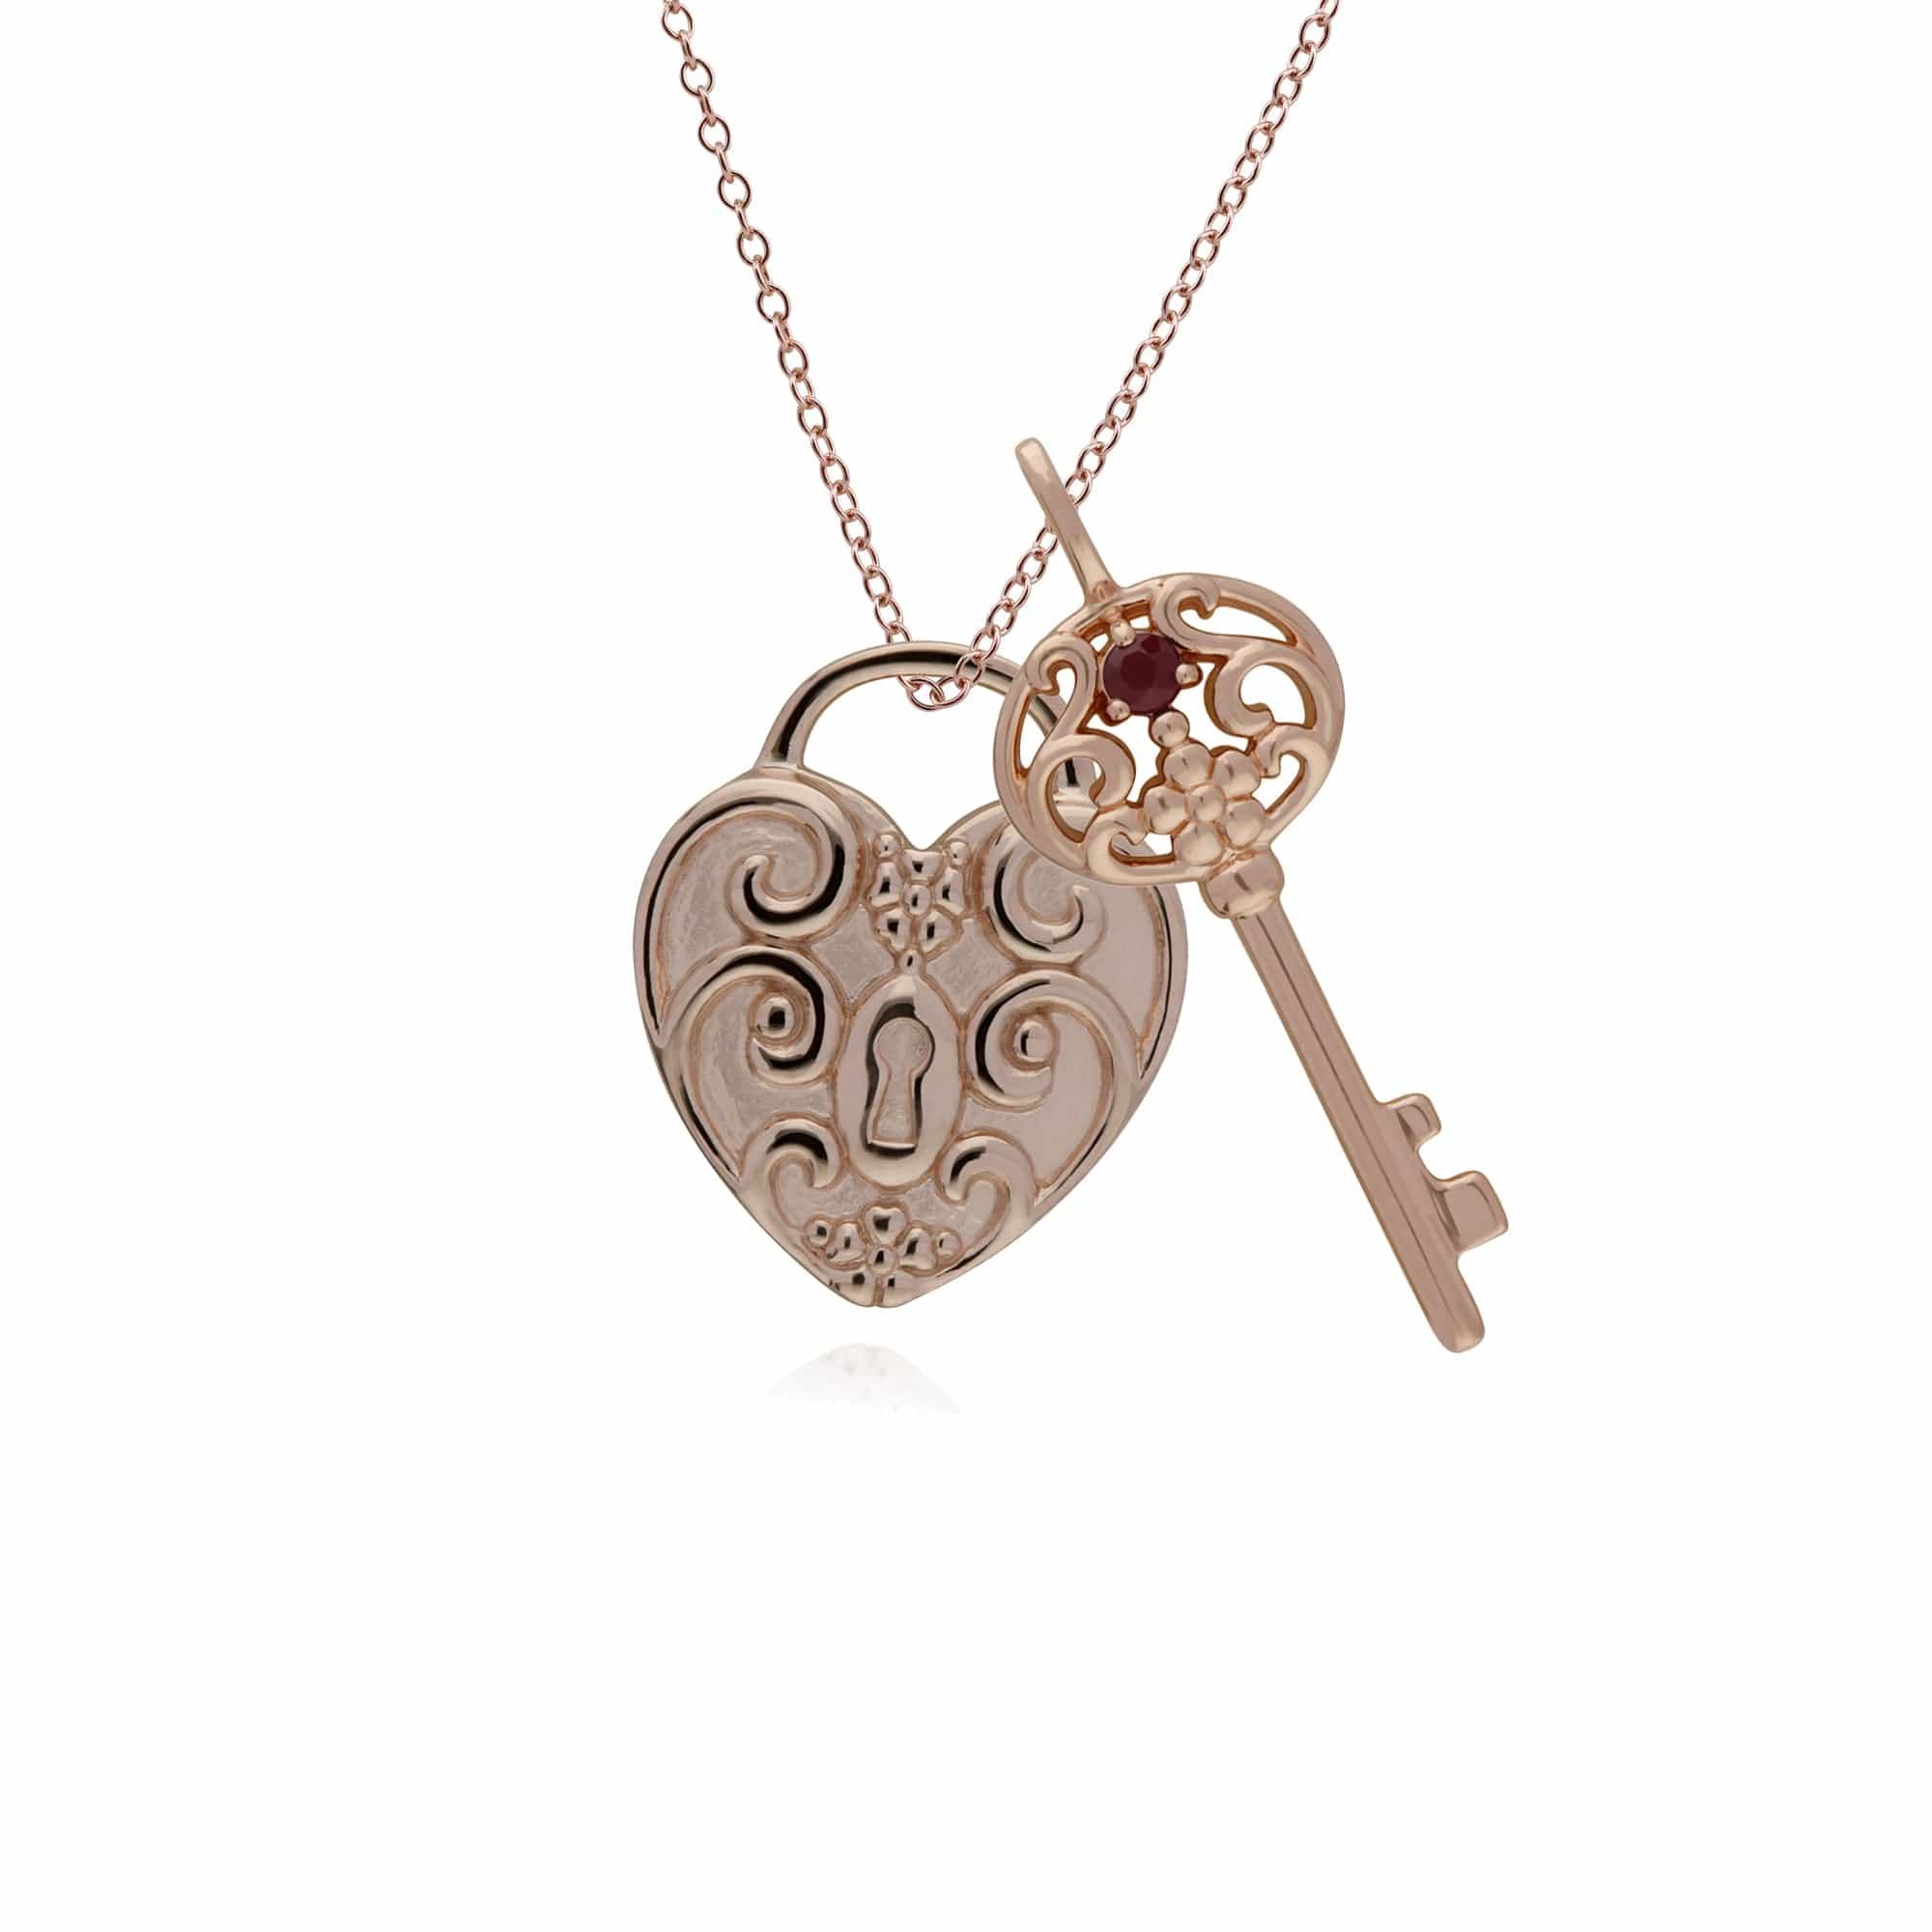 270P026703925-270P026501925 Classic Swirl Heart Lock Pendant & Ruby Big Key Charm in Rose Gold Plated 925 Sterling Silver 1